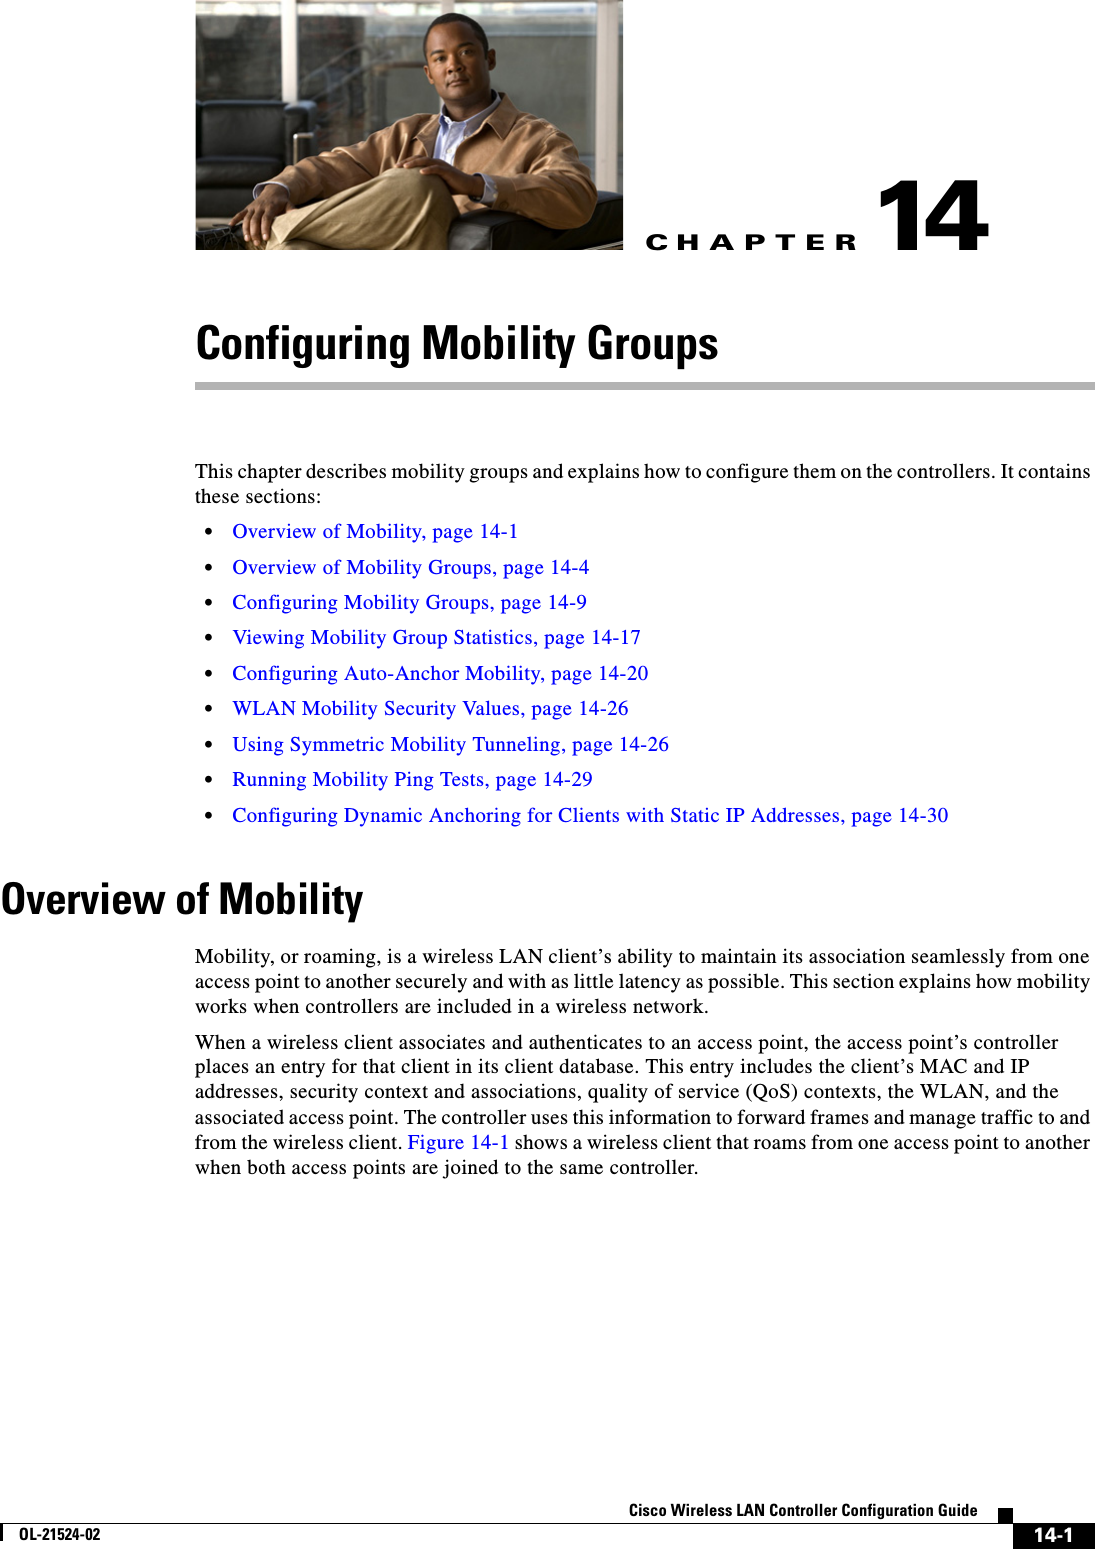 CHAPTER14-1Cisco Wireless LAN Controller Configuration GuideOL-21524-0214Configuring Mobility GroupsThis chapter describes mobility groups and explains how to configure them on the controllers. It contains these sections:  • Overview of Mobility, page 14-1  • Overview of Mobility Groups, page 14-4  • Configuring Mobility Groups, page 14-9  • Viewing Mobility Group Statistics, page 14-17  • Configuring Auto-Anchor Mobility, page 14-20  • WLAN Mobility Security Values, page 14-26  • Using Symmetric Mobility Tunneling, page 14-26  • Running Mobility Ping Tests, page 14-29  • Configuring Dynamic Anchoring for Clients with Static IP Addresses, page 14-30Overview of MobilityMobility, or roaming, is a wireless LAN client’s ability to maintain its association seamlessly from one access point to another securely and with as little latency as possible. This section explains how mobility works when controllers are included in a wireless network.When a wireless client associates and authenticates to an access point, the access point’s controller places an entry for that client in its client database. This entry includes the client’s MAC and IP addresses, security context and associations, quality of service (QoS) contexts, the WLAN, and the associated access point. The controller uses this information to forward frames and manage traffic to and from the wireless client. Figure 14-1 shows a wireless client that roams from one access point to another when both access points are joined to the same controller.